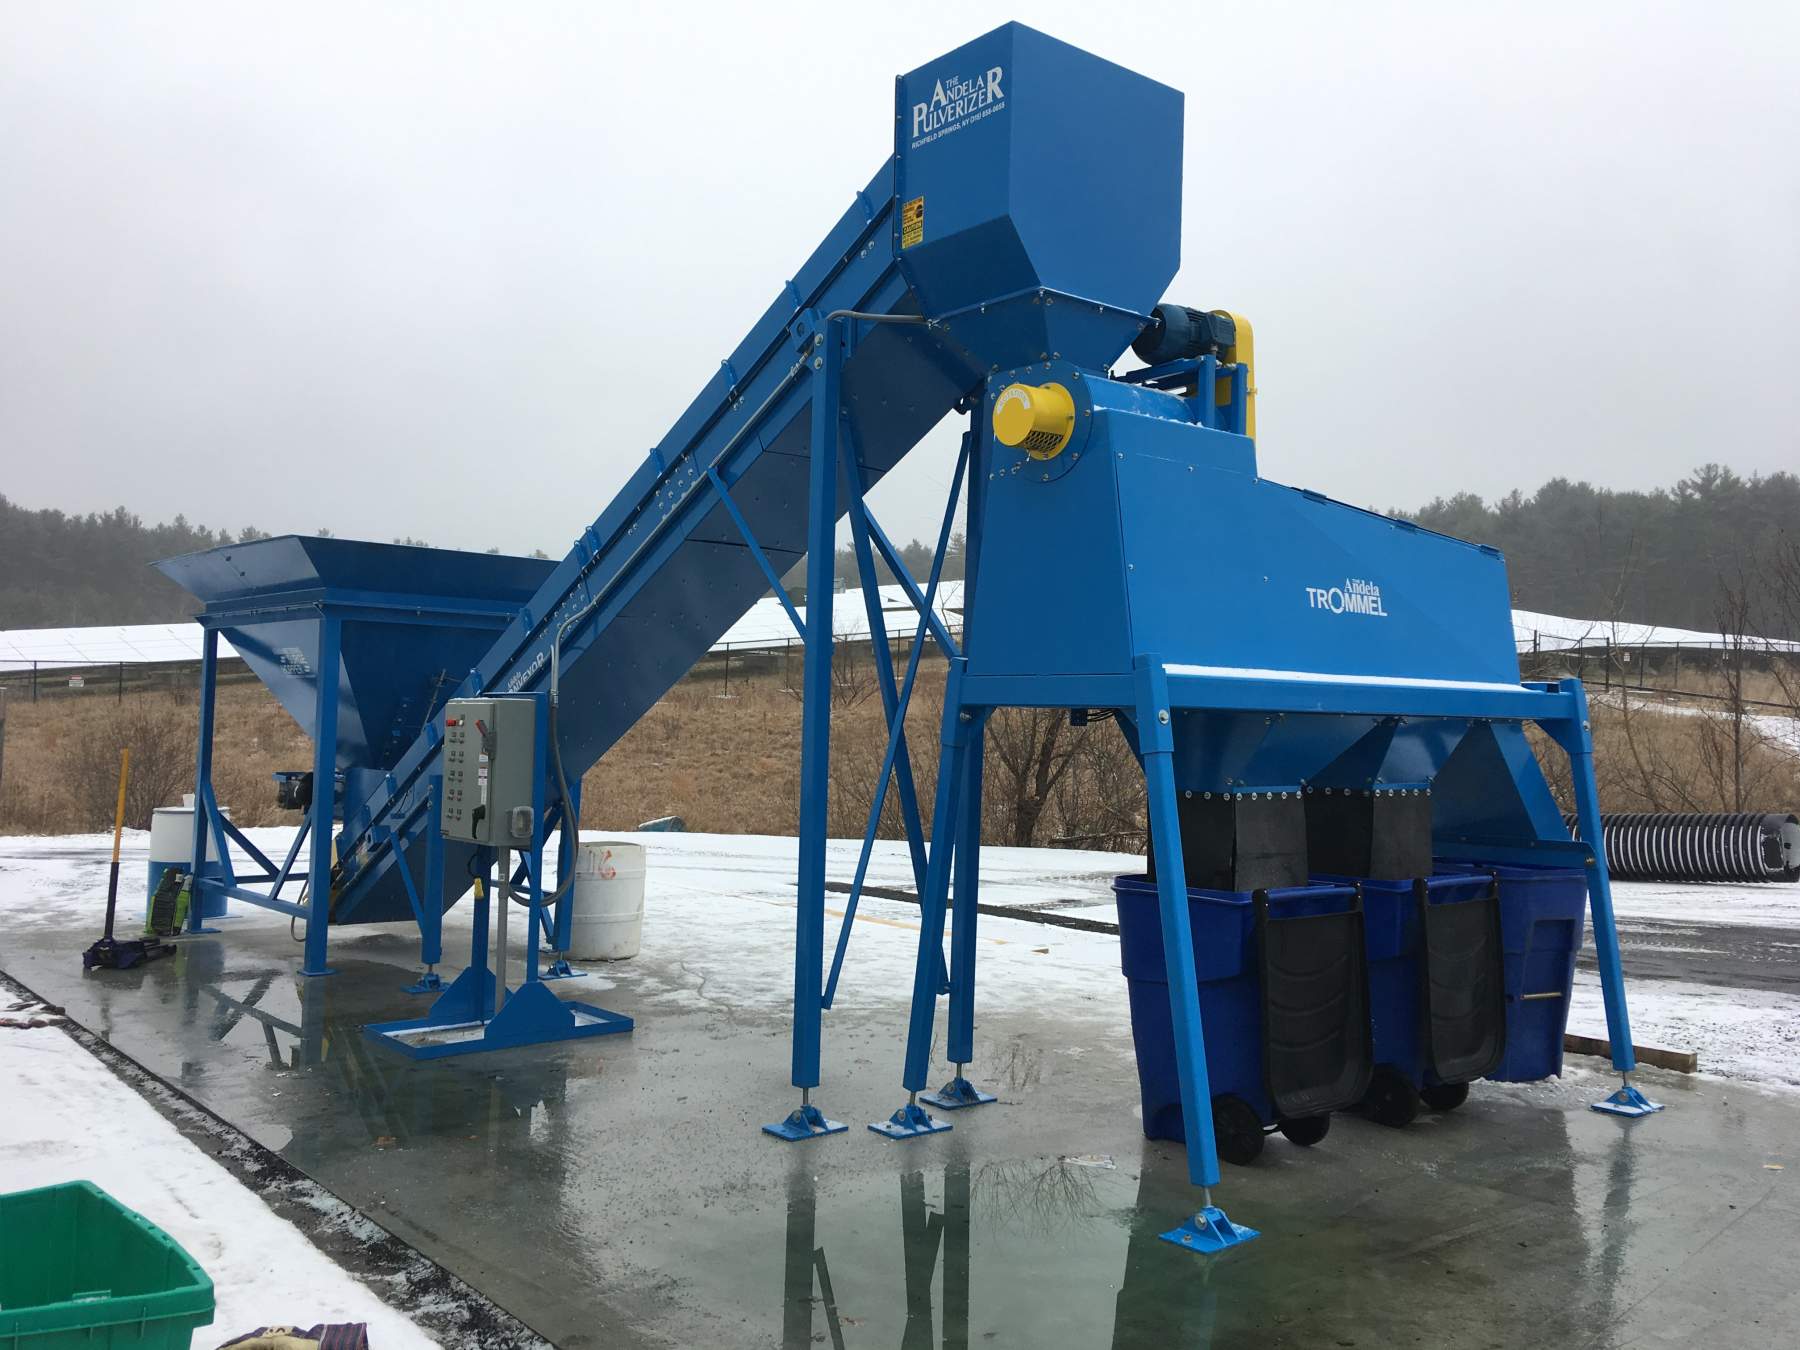 GP-05L glass pulverizer from Andela